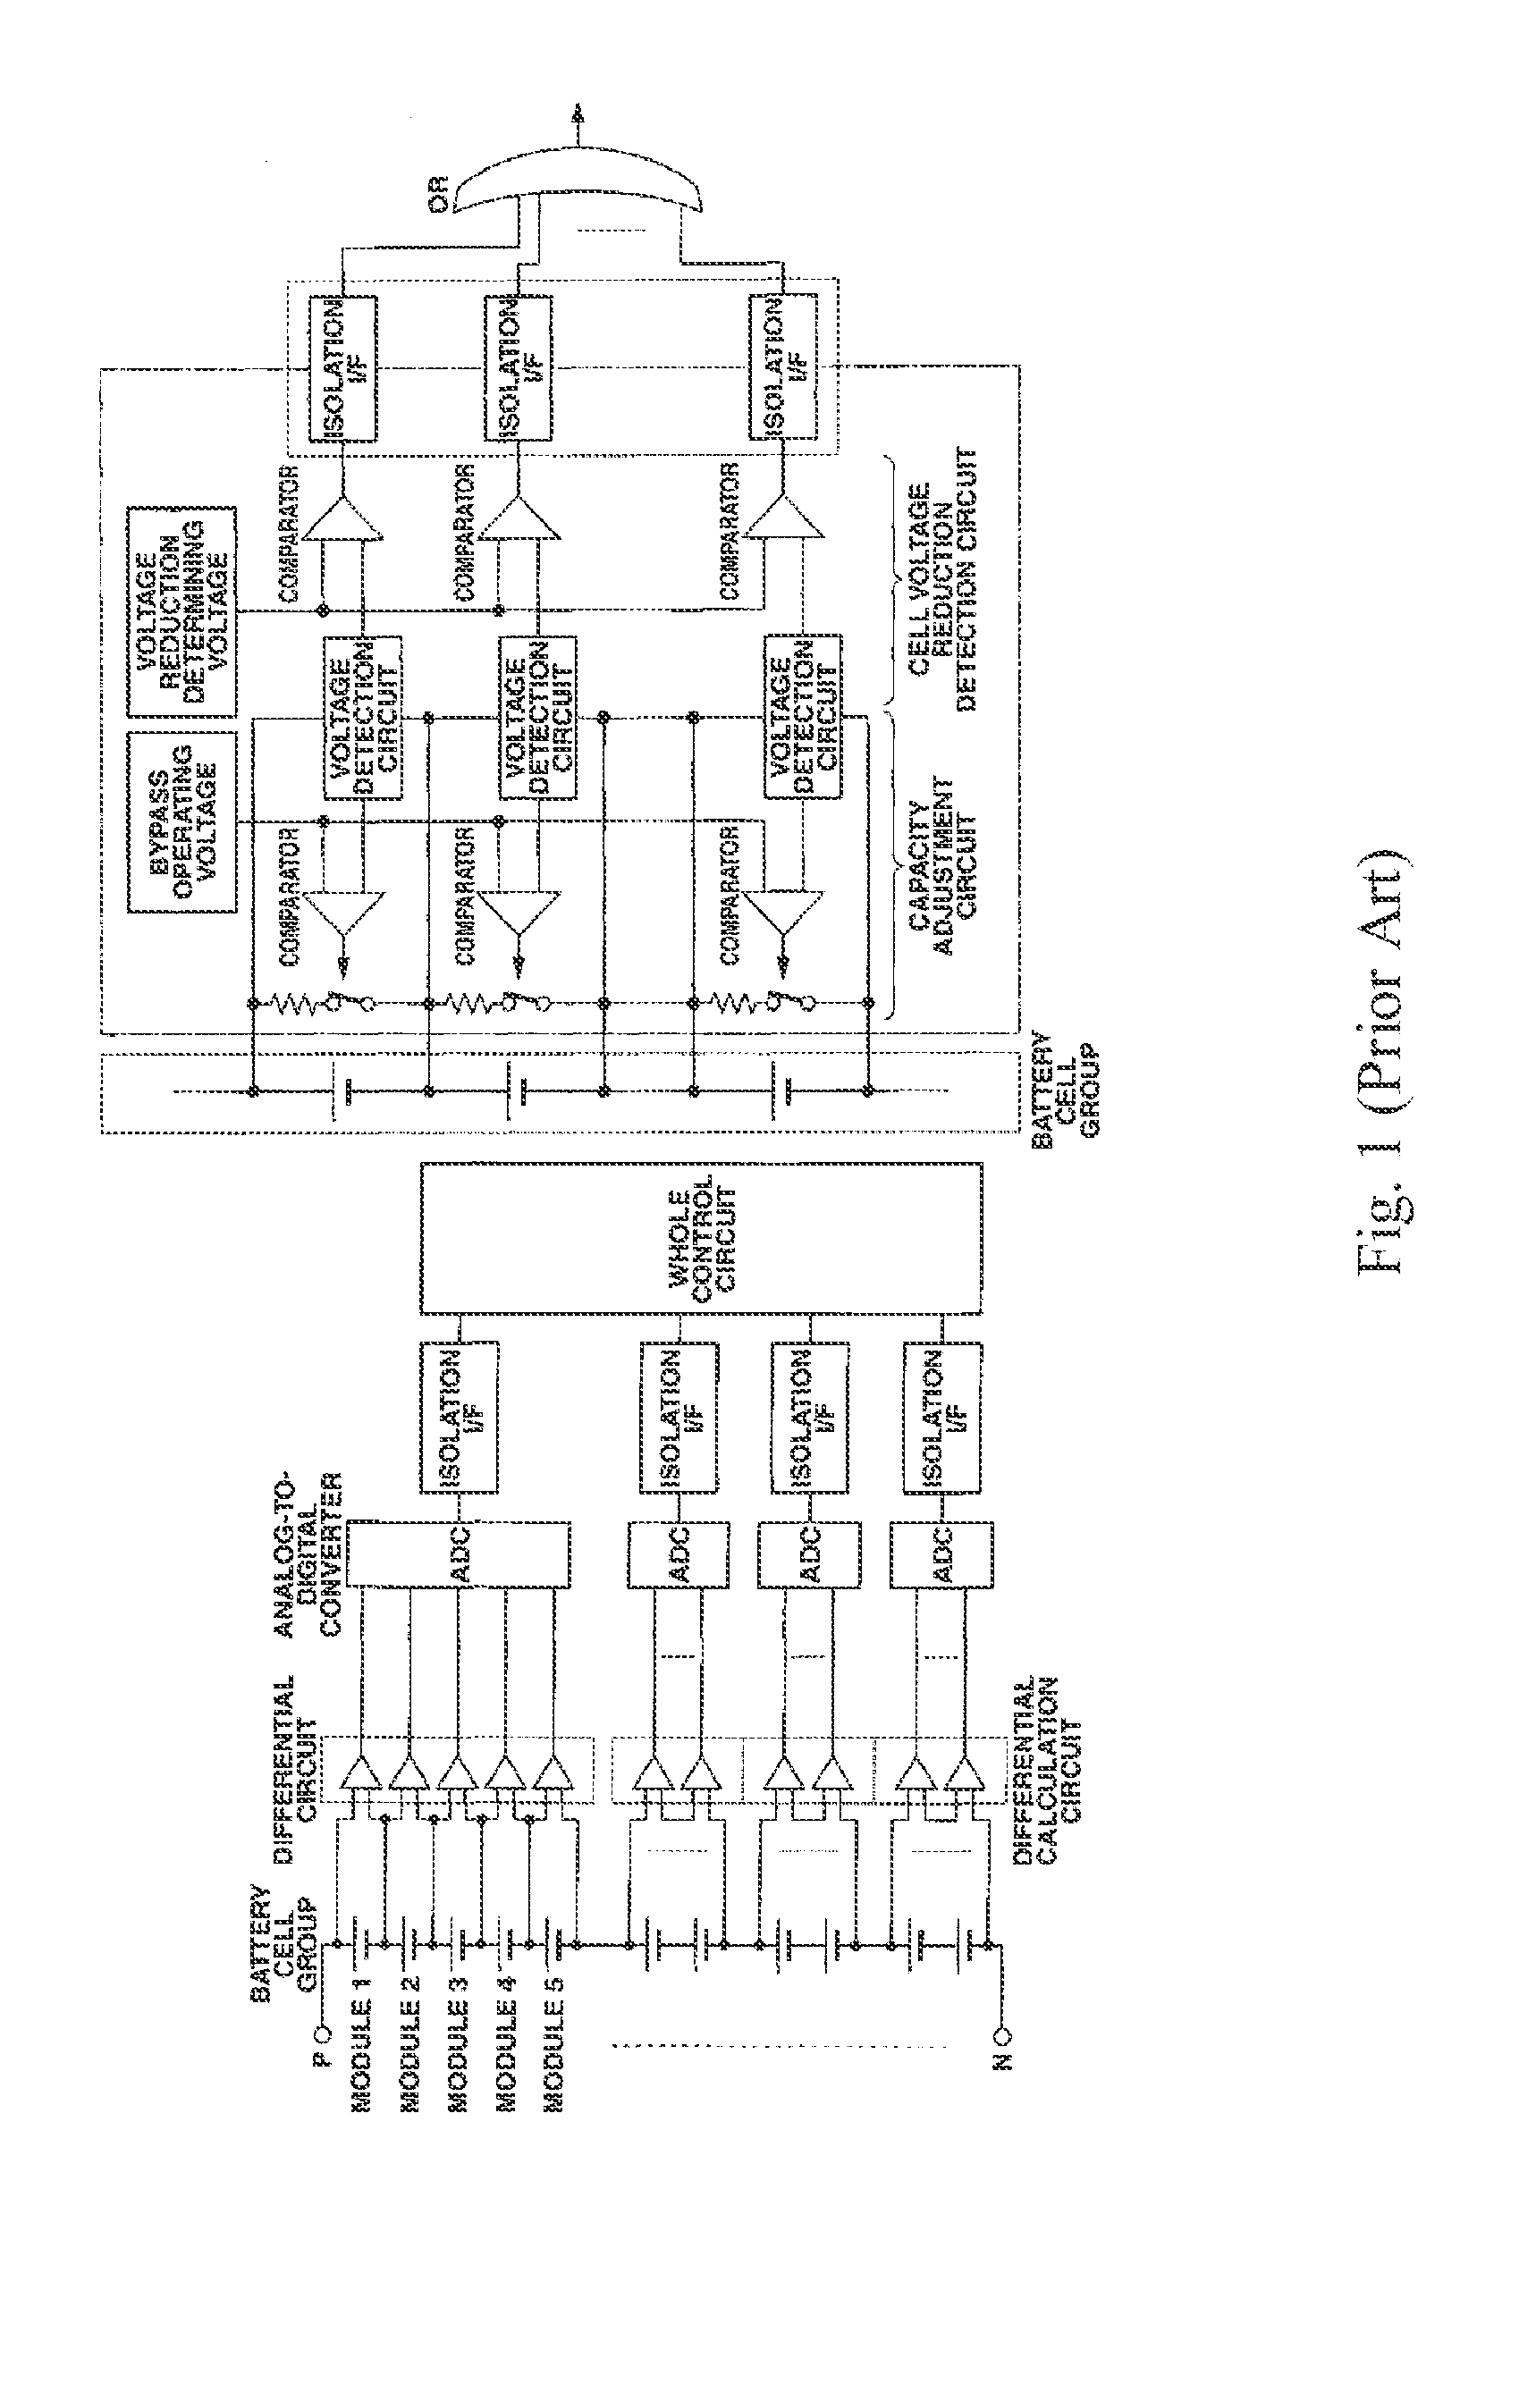 Cell voltage monitoring and self-calibrating device